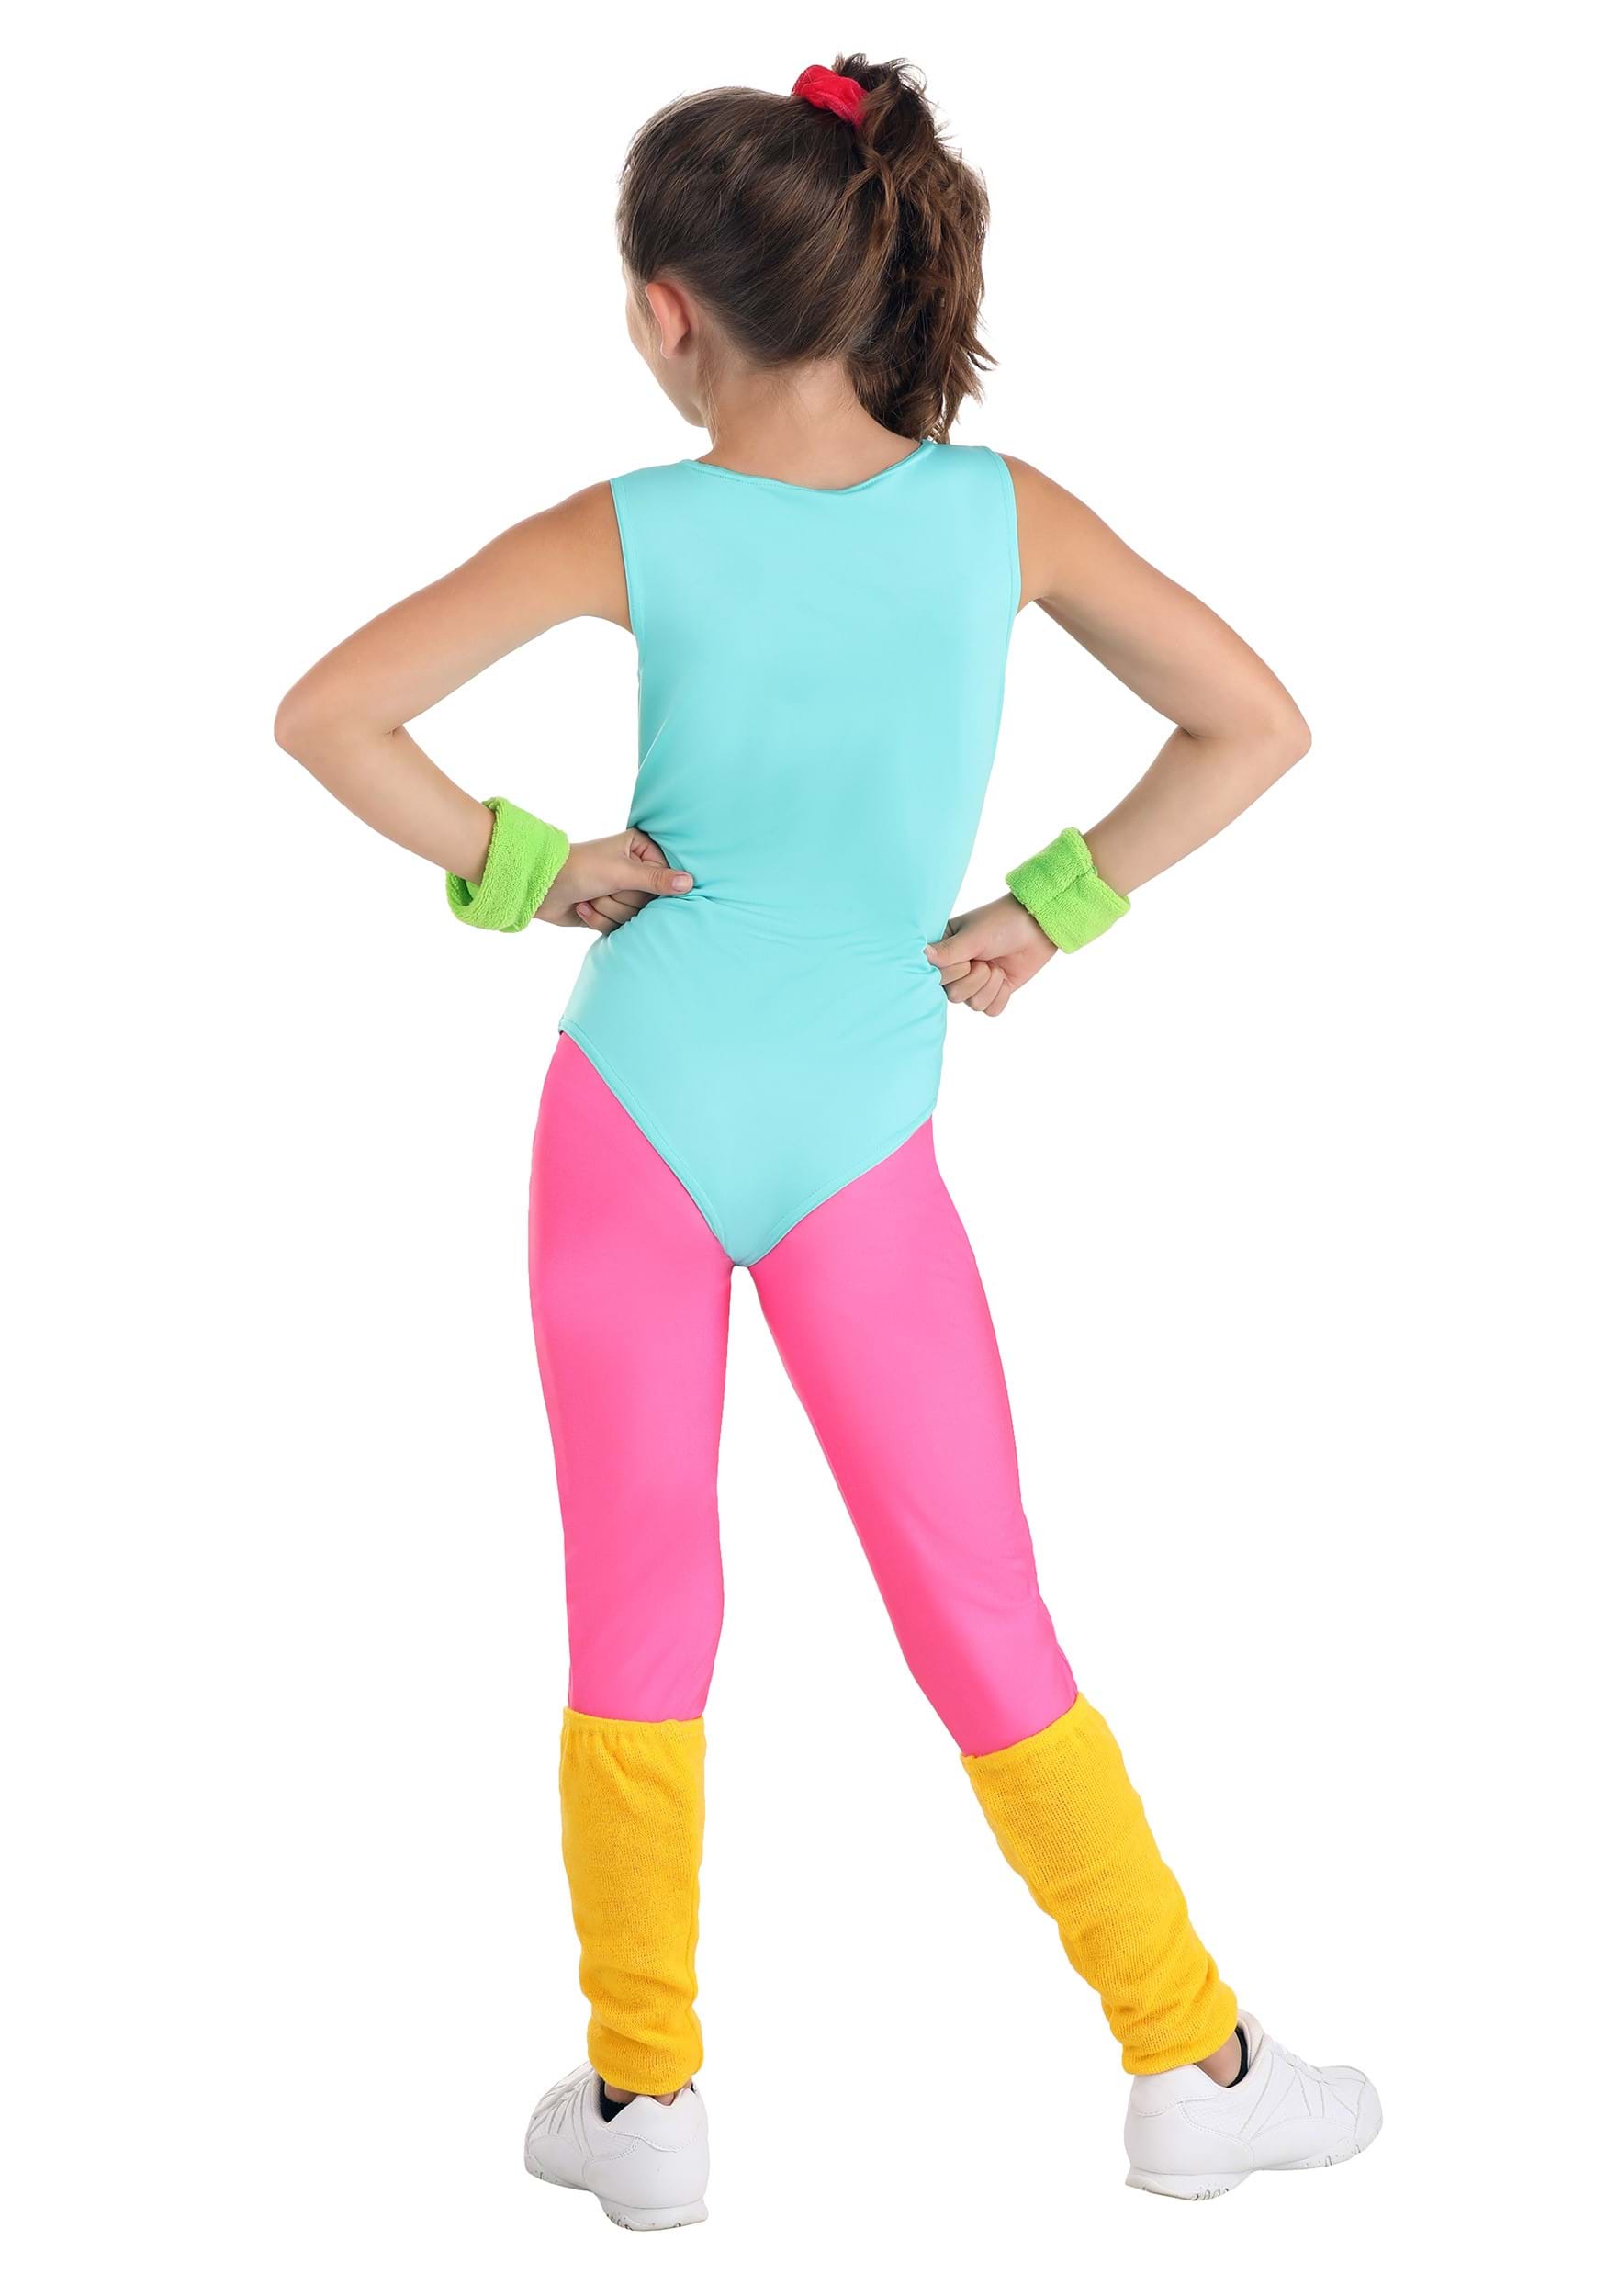 80s workout costume  80s halloween costumes, 80s workout costume